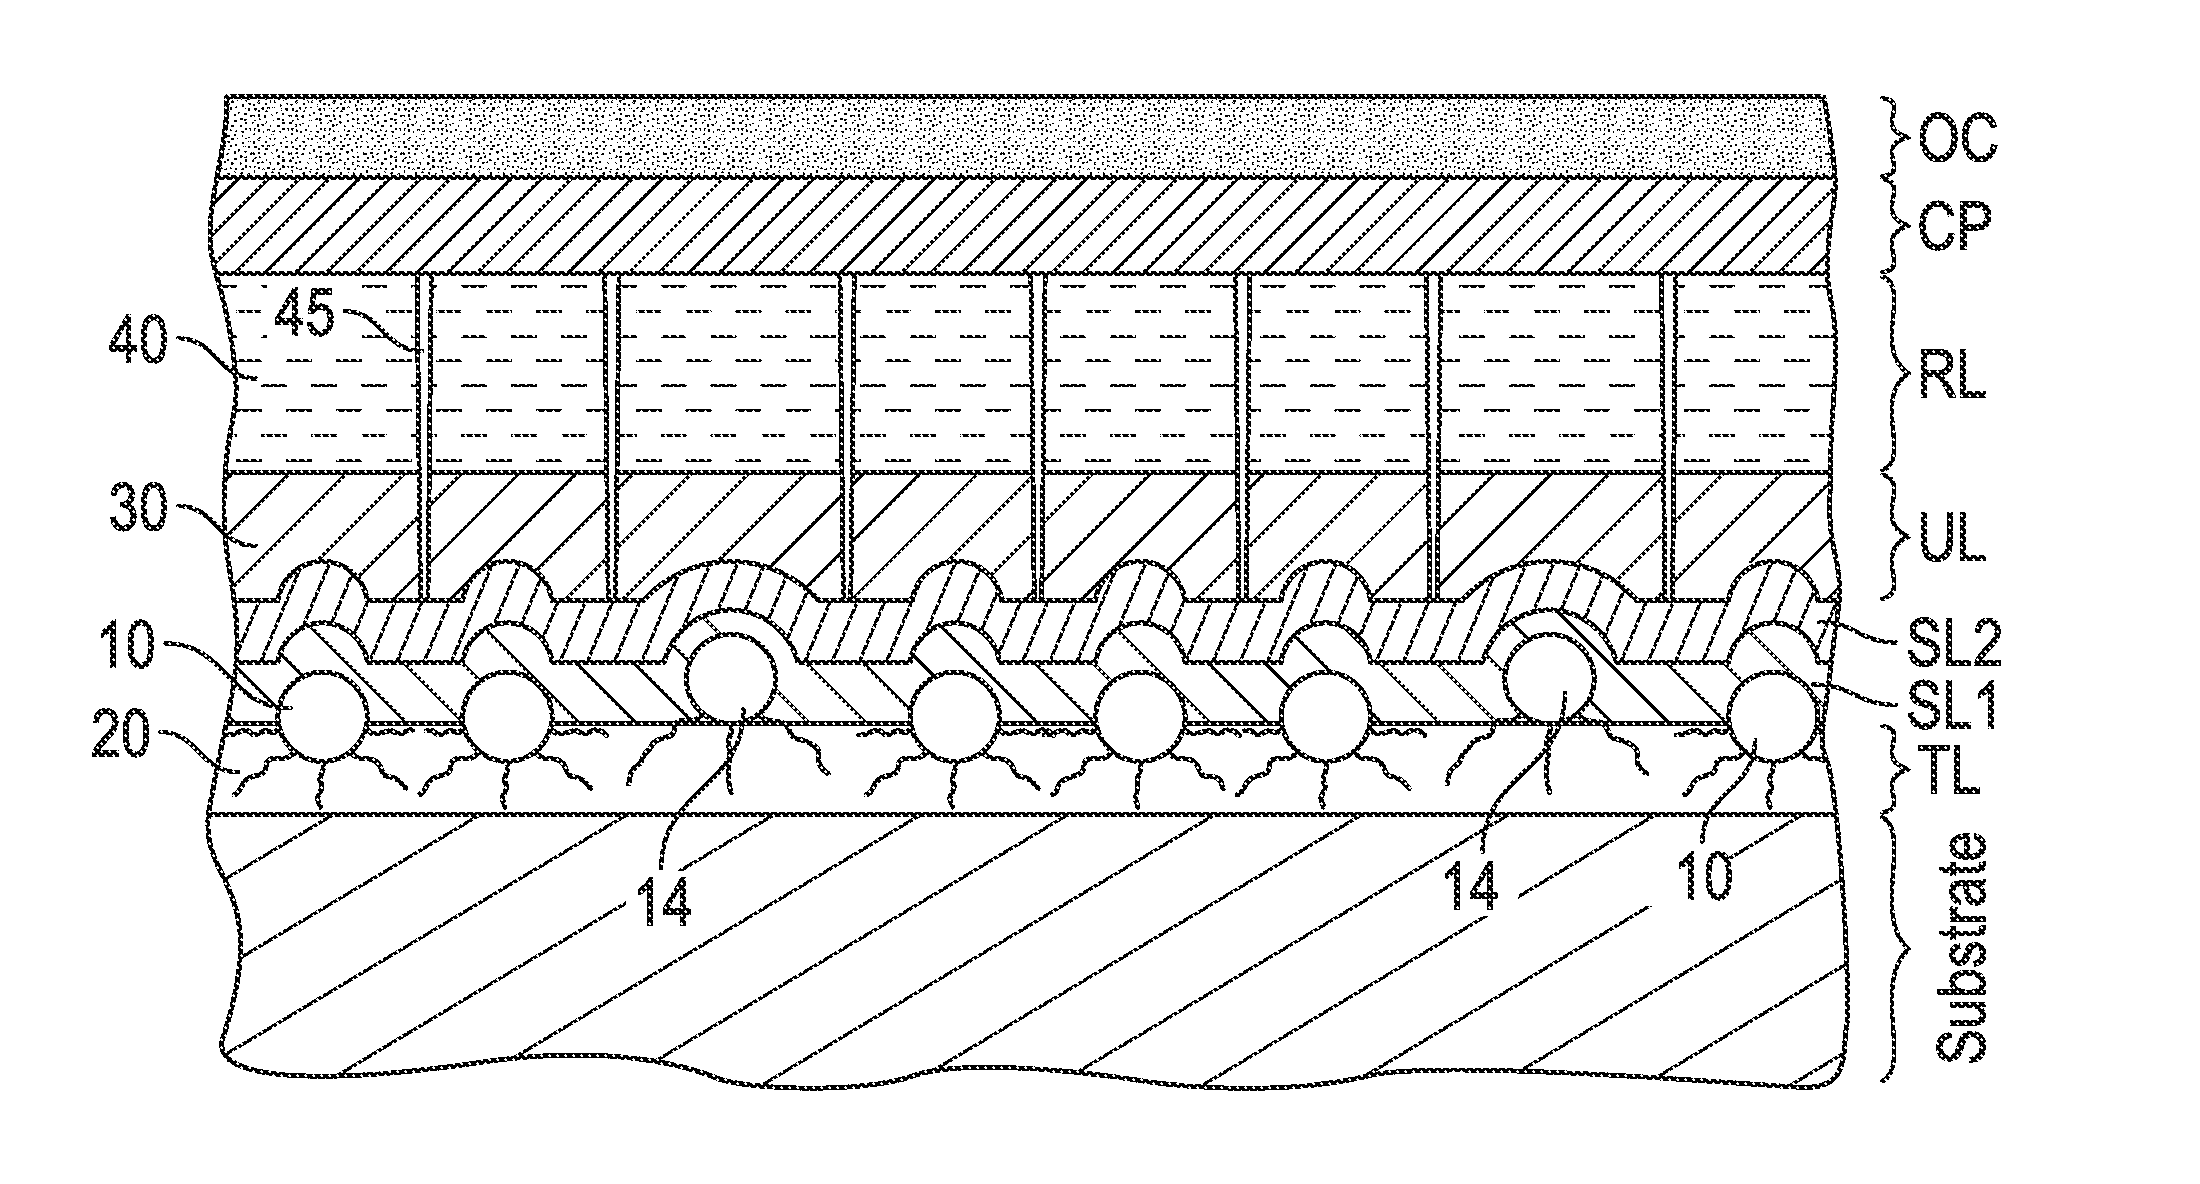 Perpendicular magnetic recording disk with template layer formed of a blend of nanoparticles